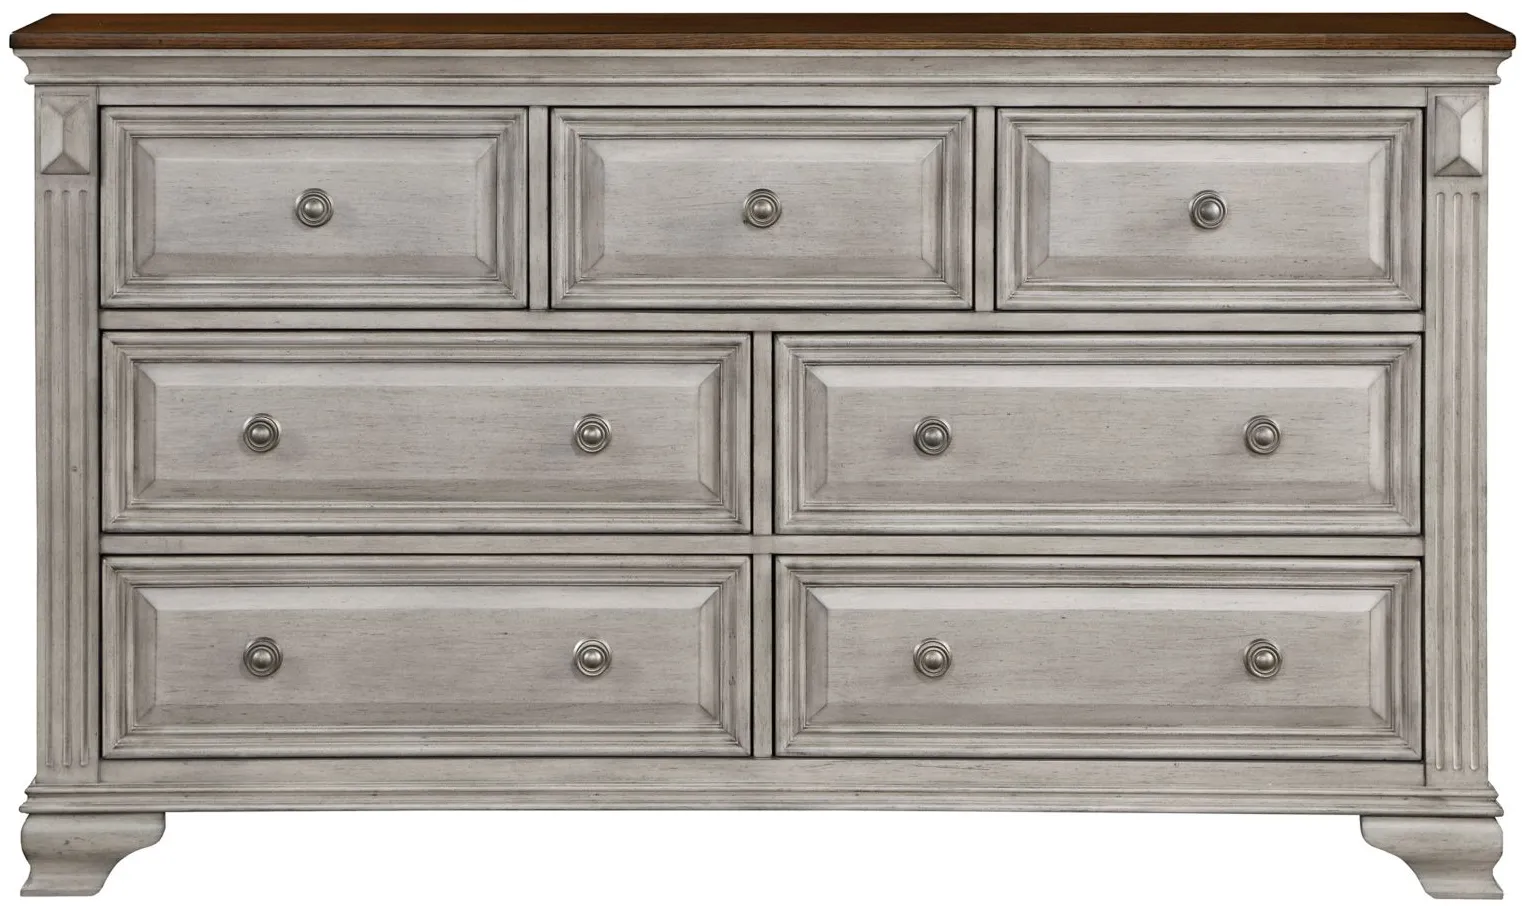 Aria Dresser in 2-Tones Finish (Brown and Gray) by Homelegance